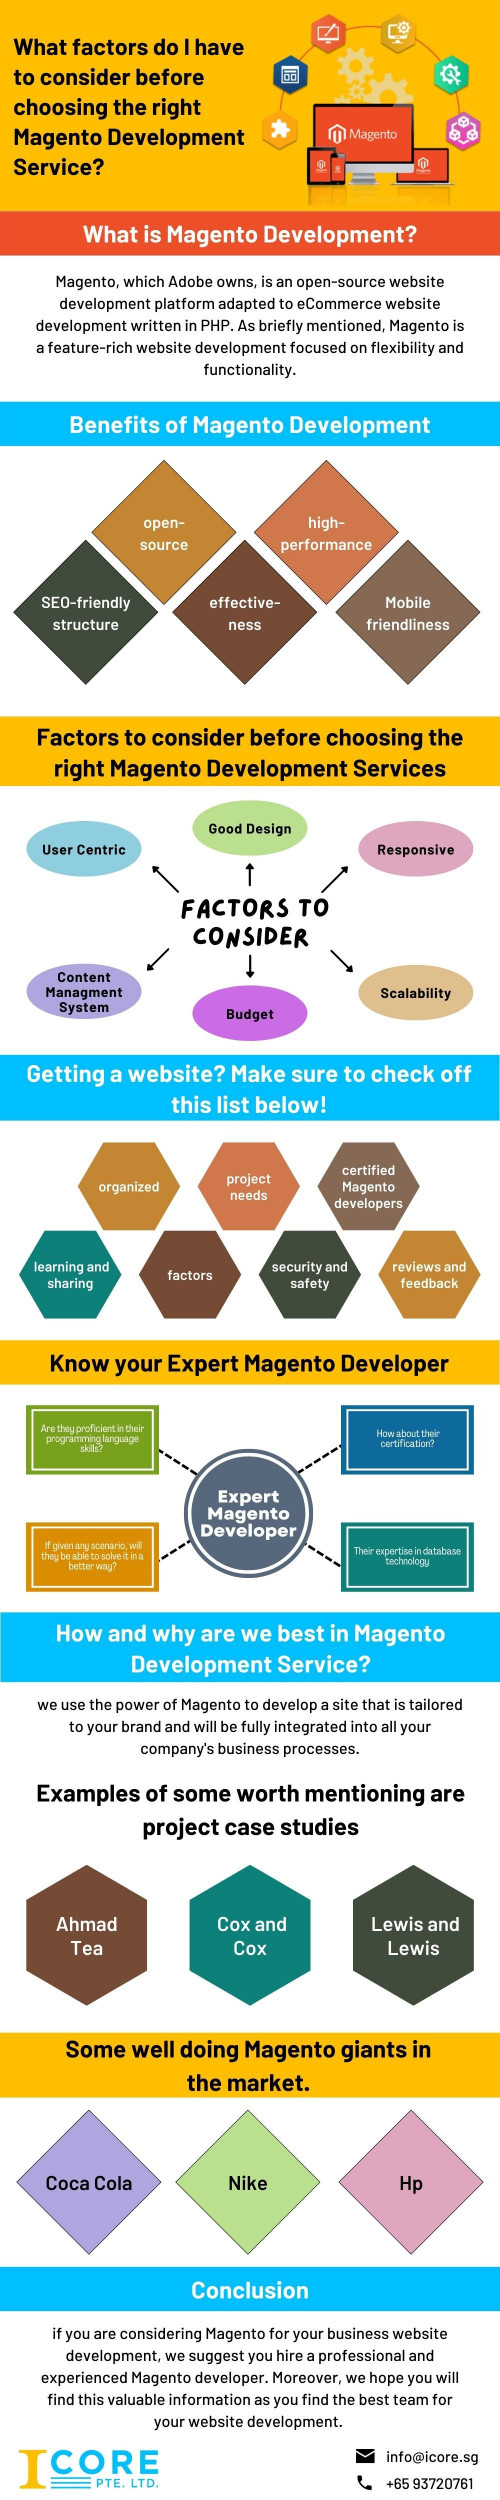 What-factors-do-I-have-to-consider-before-choosing-the-right-Magento-Development-Service.jpg